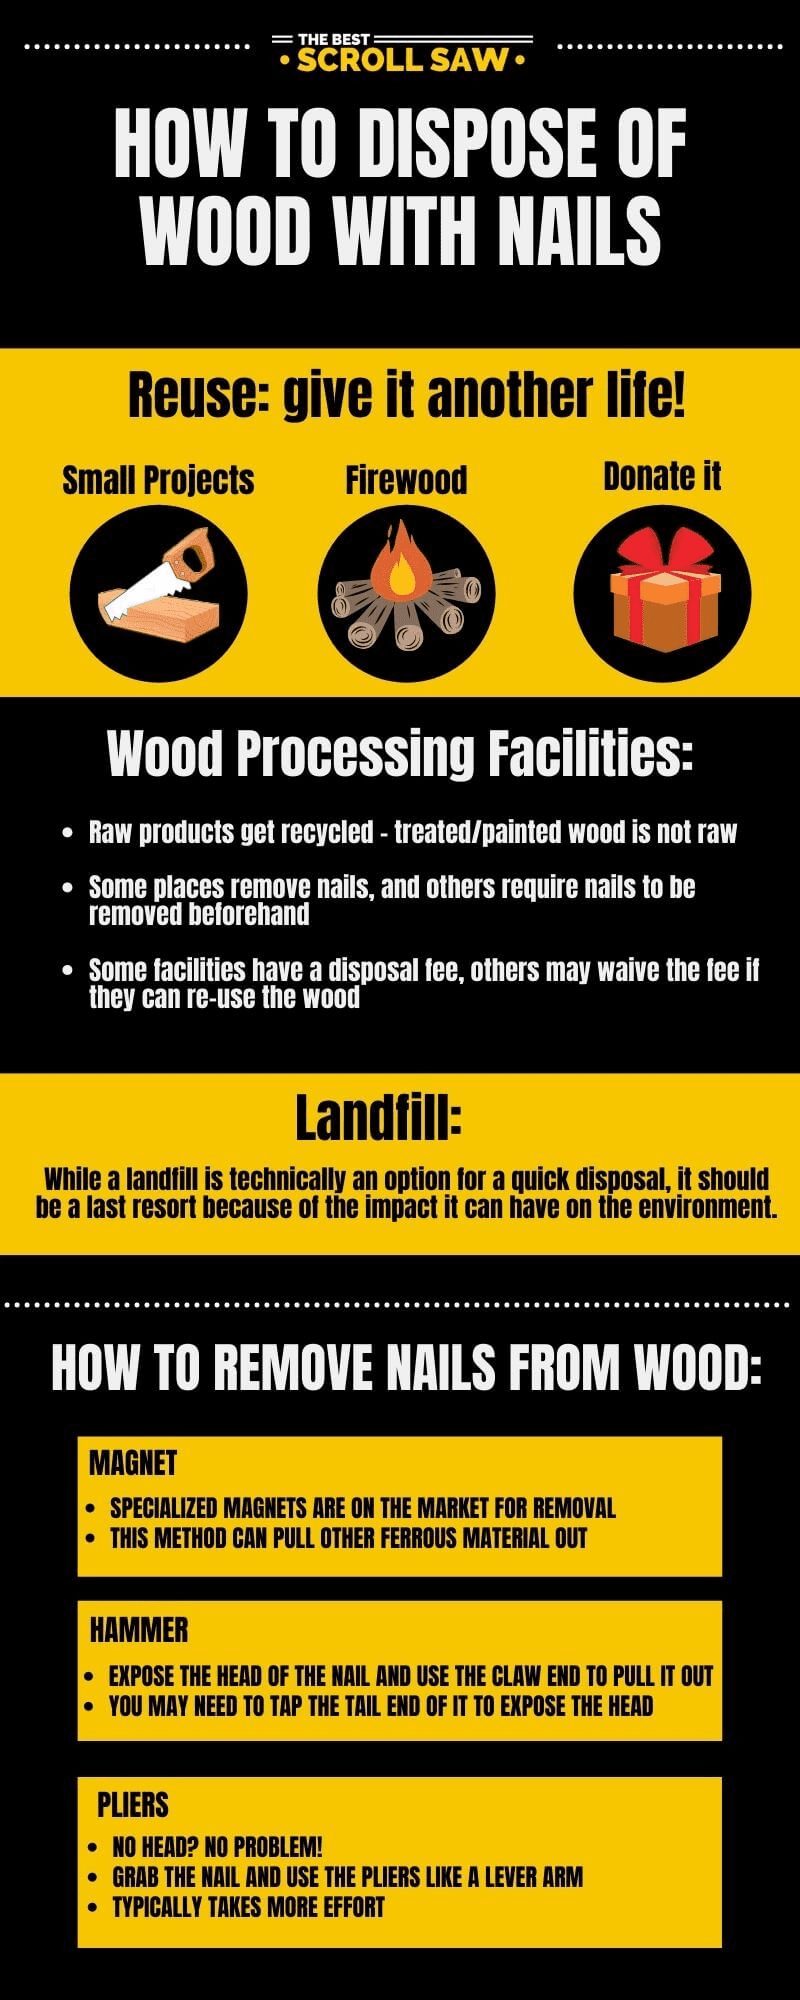 dispose of wood with nails infographic